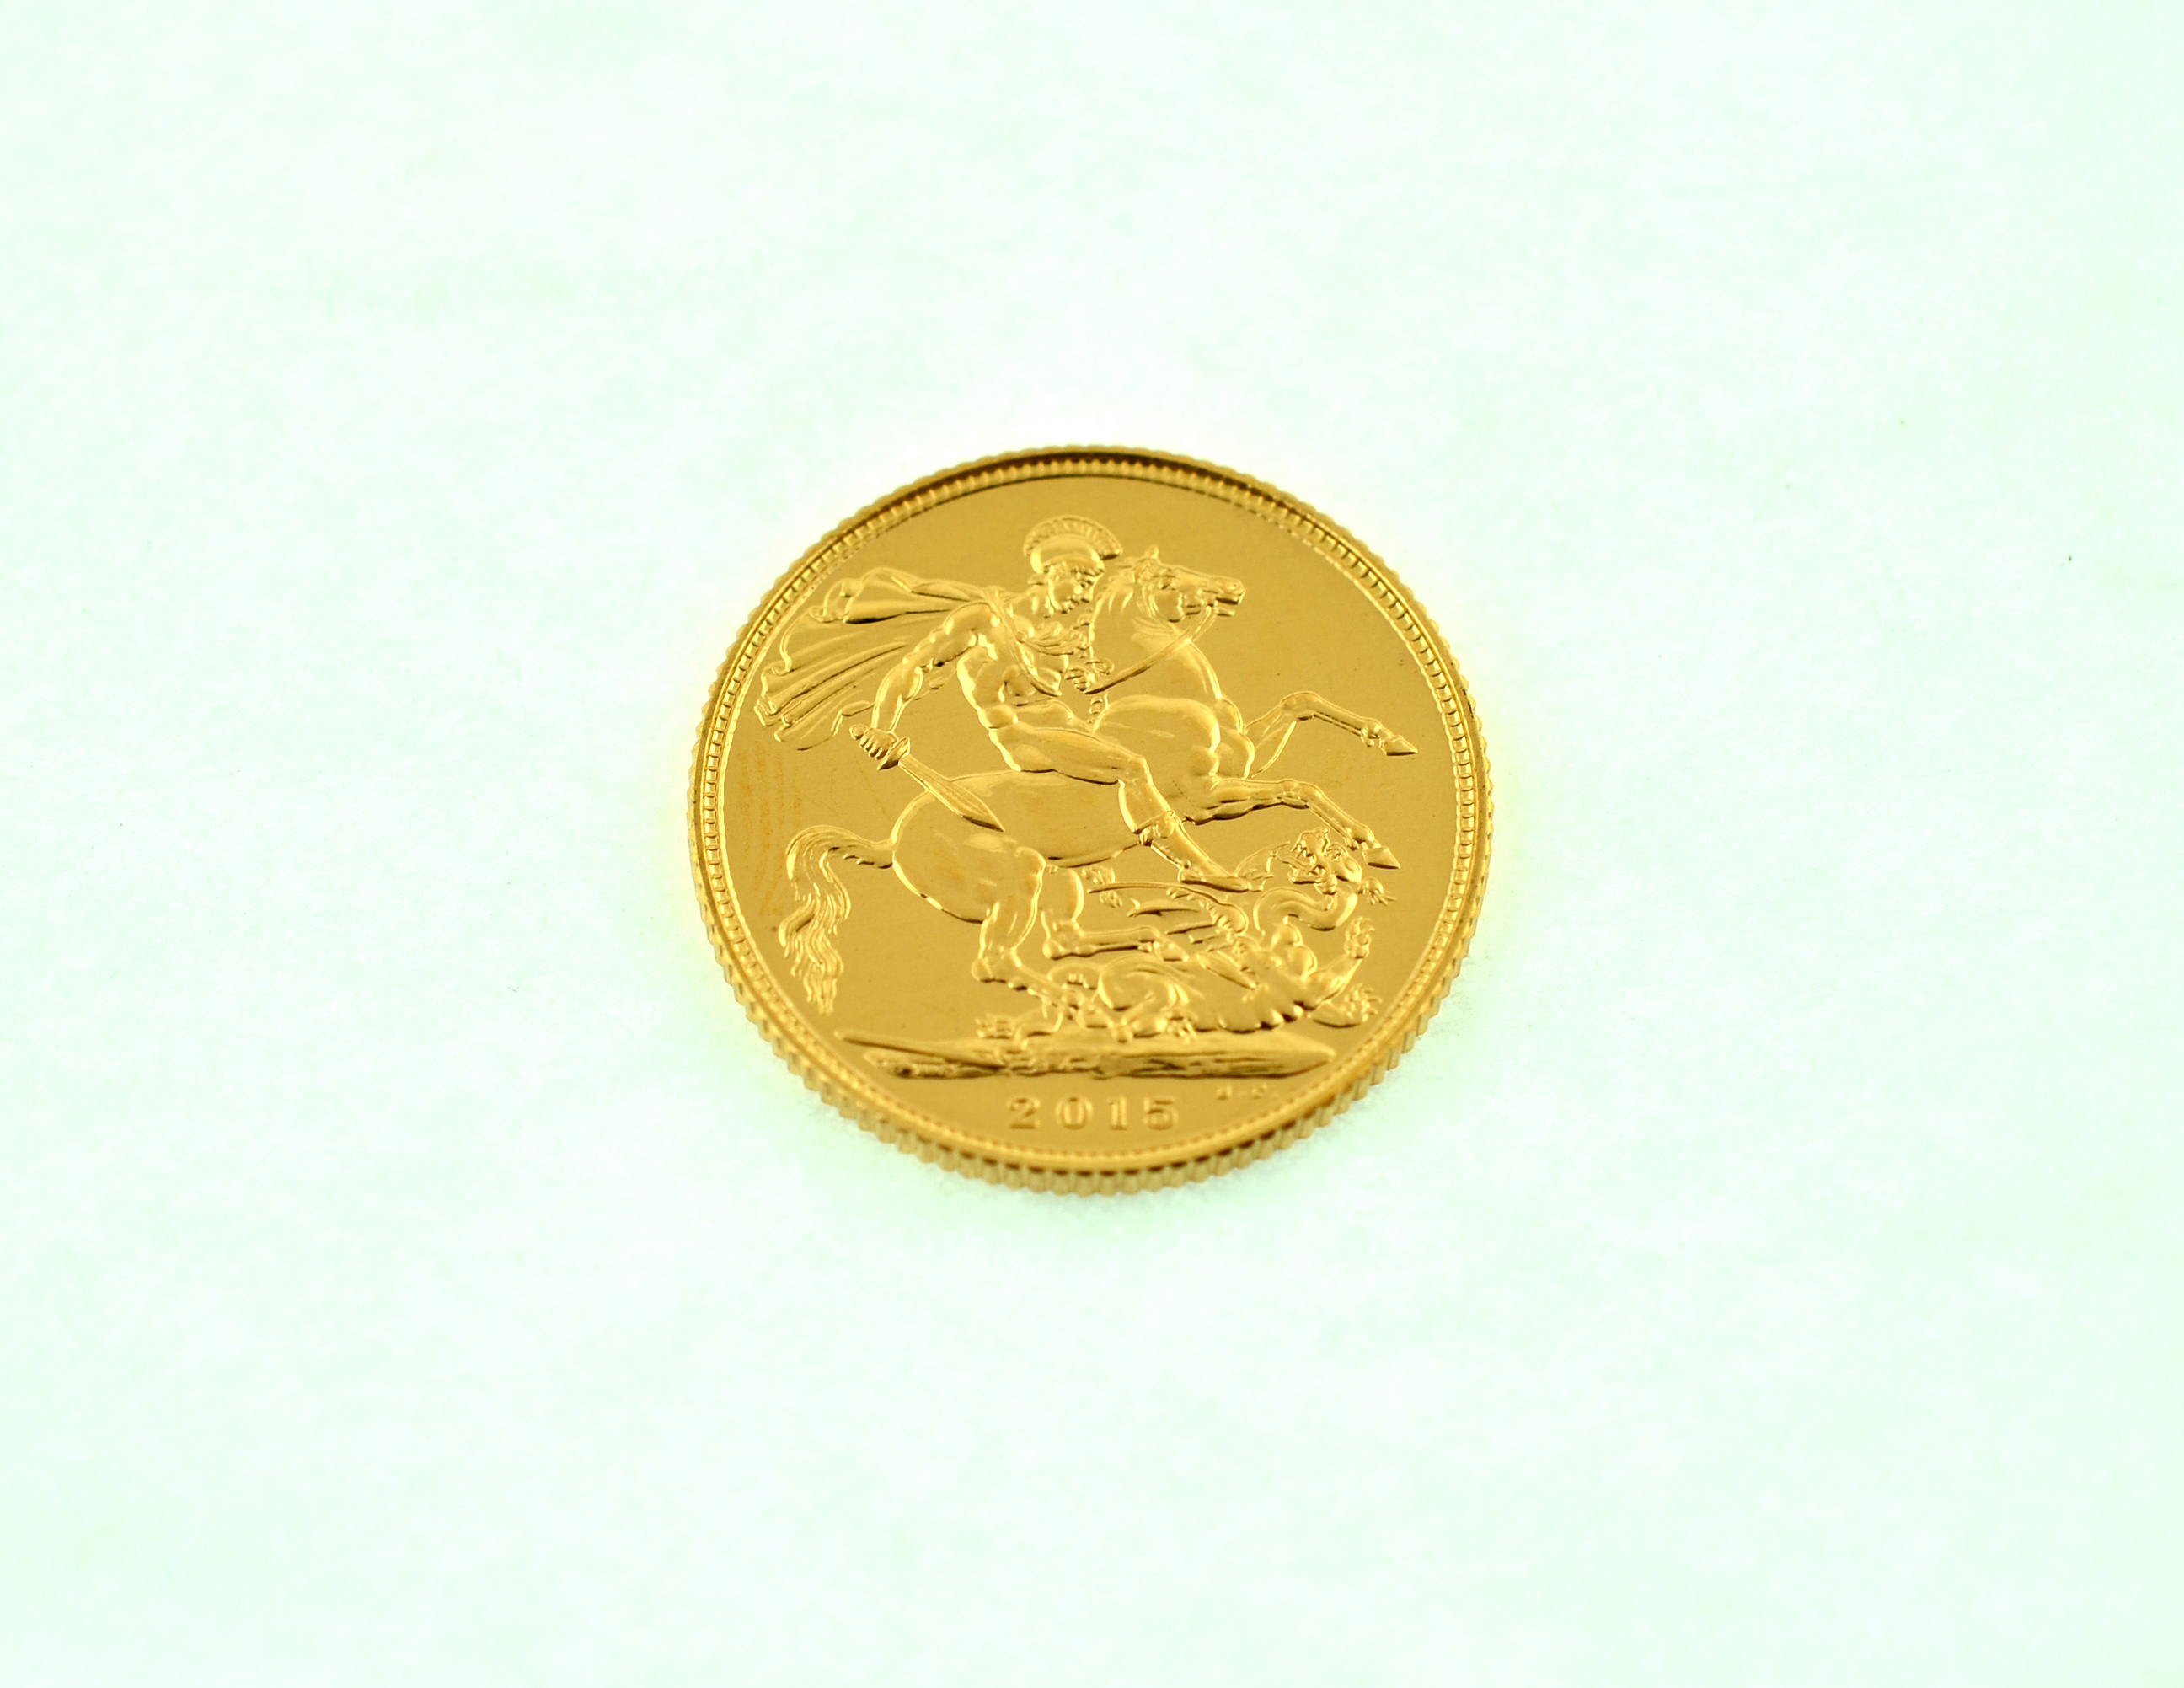 A 2015 full gold sovereign.